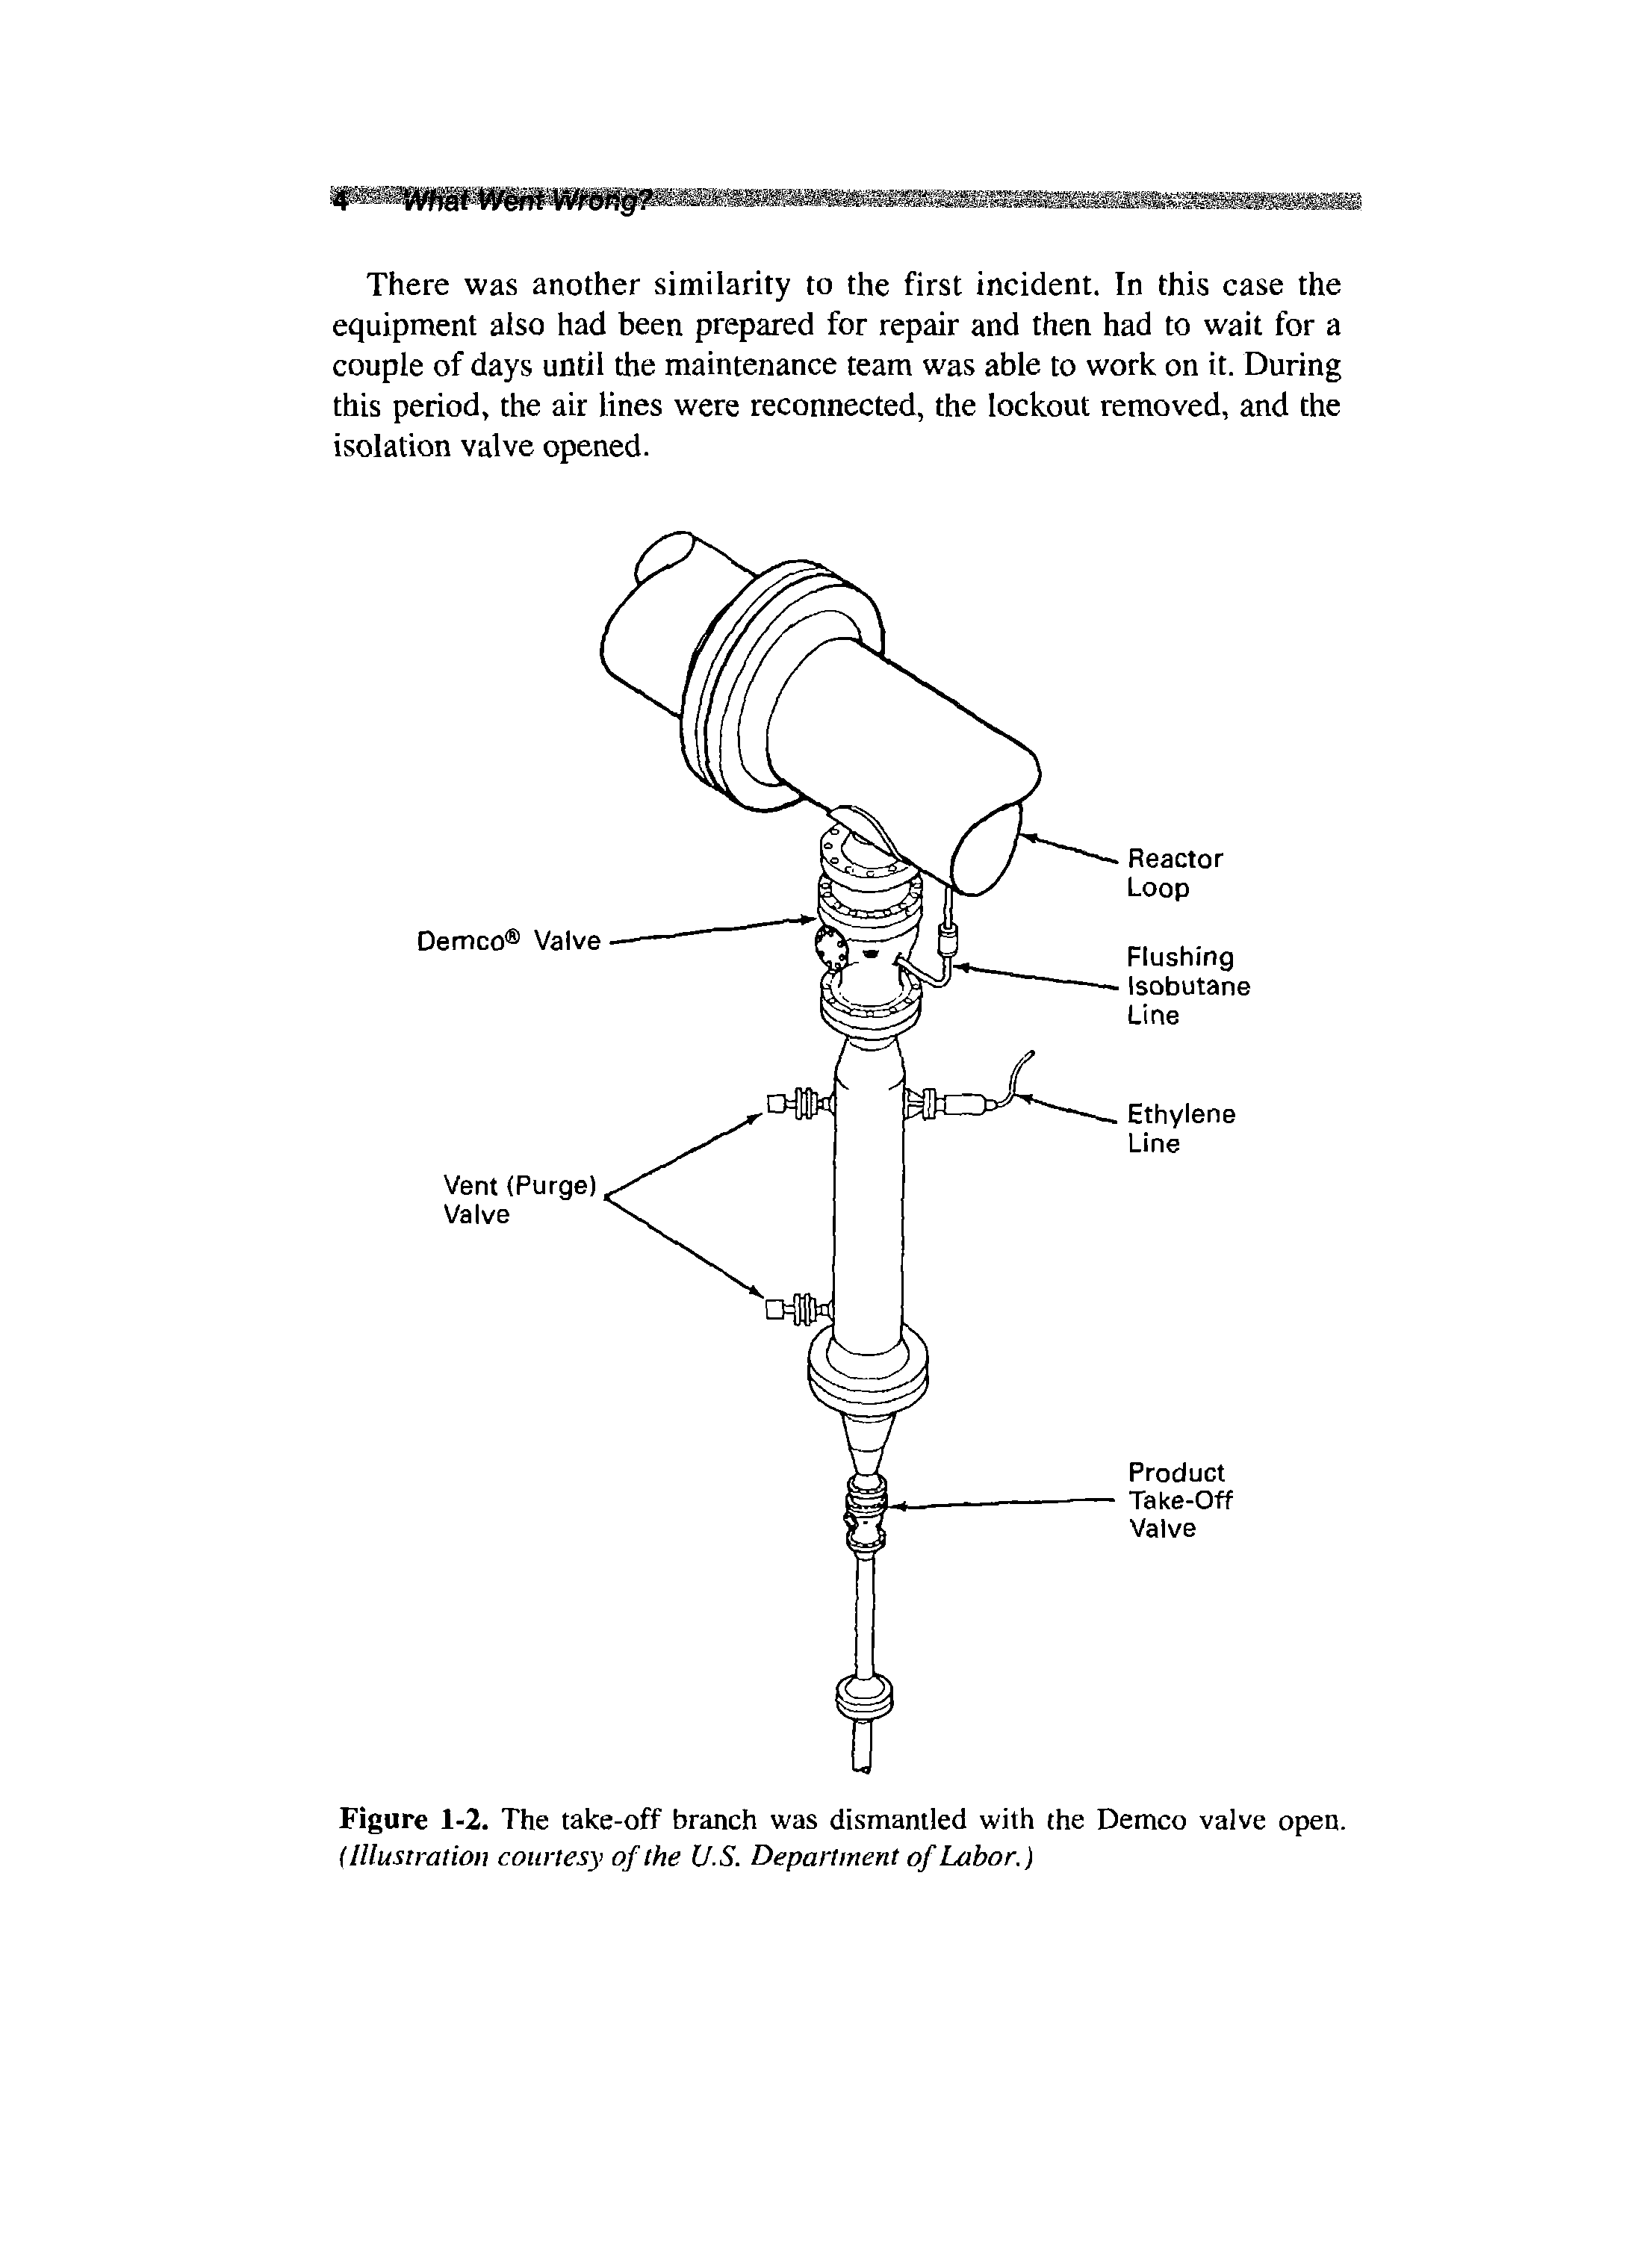 Figure 1-2. The take-off branch was dismantled with the Demco valve open. (Illustration courtesy of the U.S. Department of Labor.)...